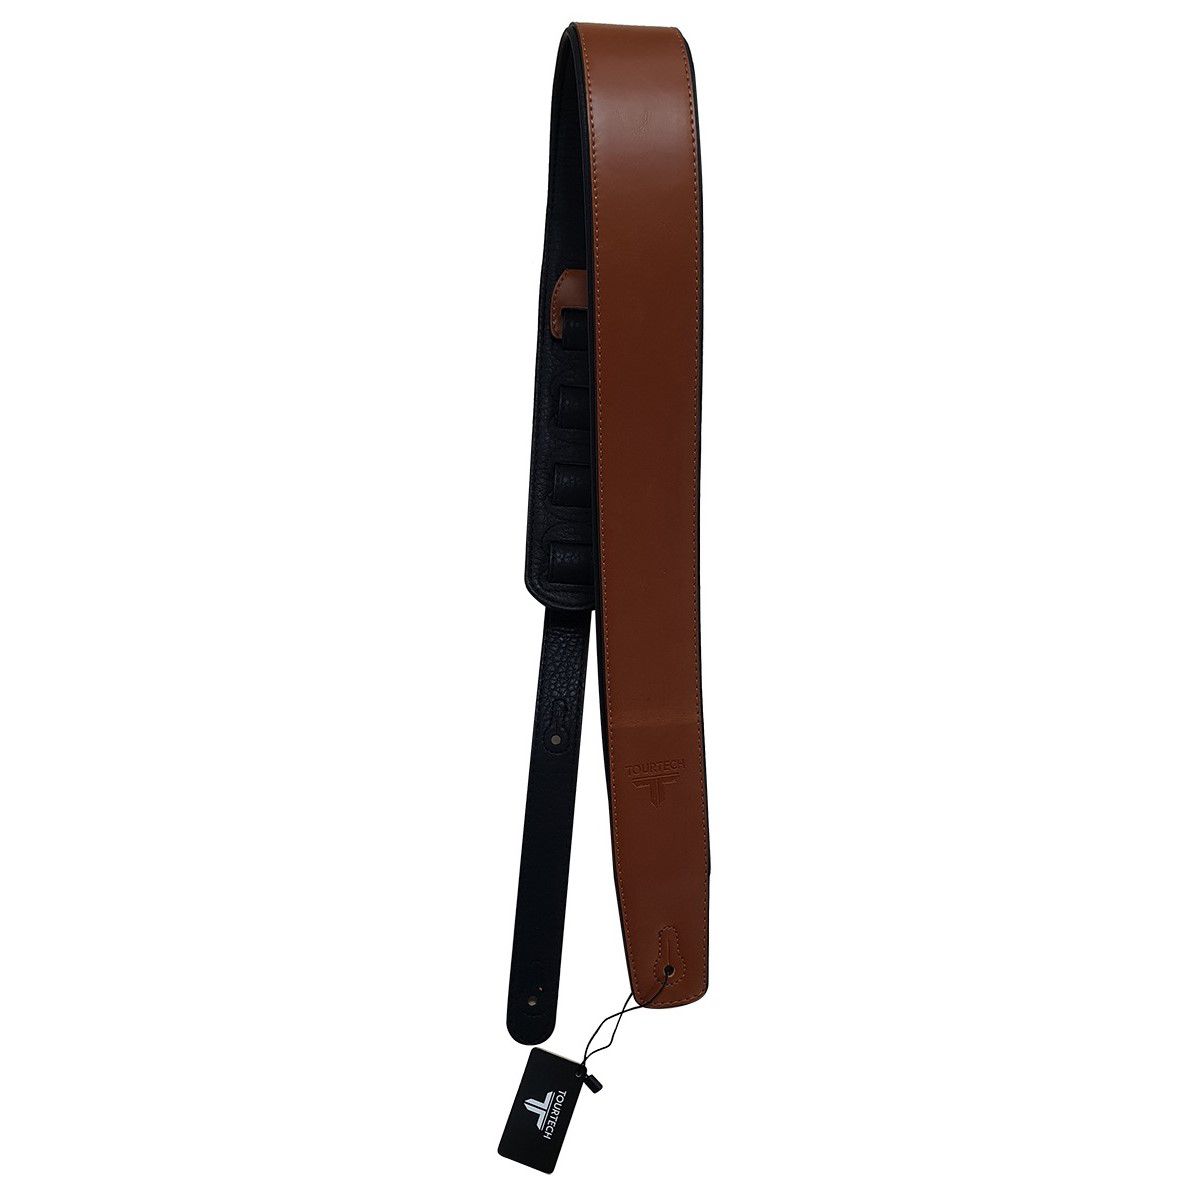 An image of TOURTECH Guitar Strap Brown - Gift for a Guitarist | PMT Online